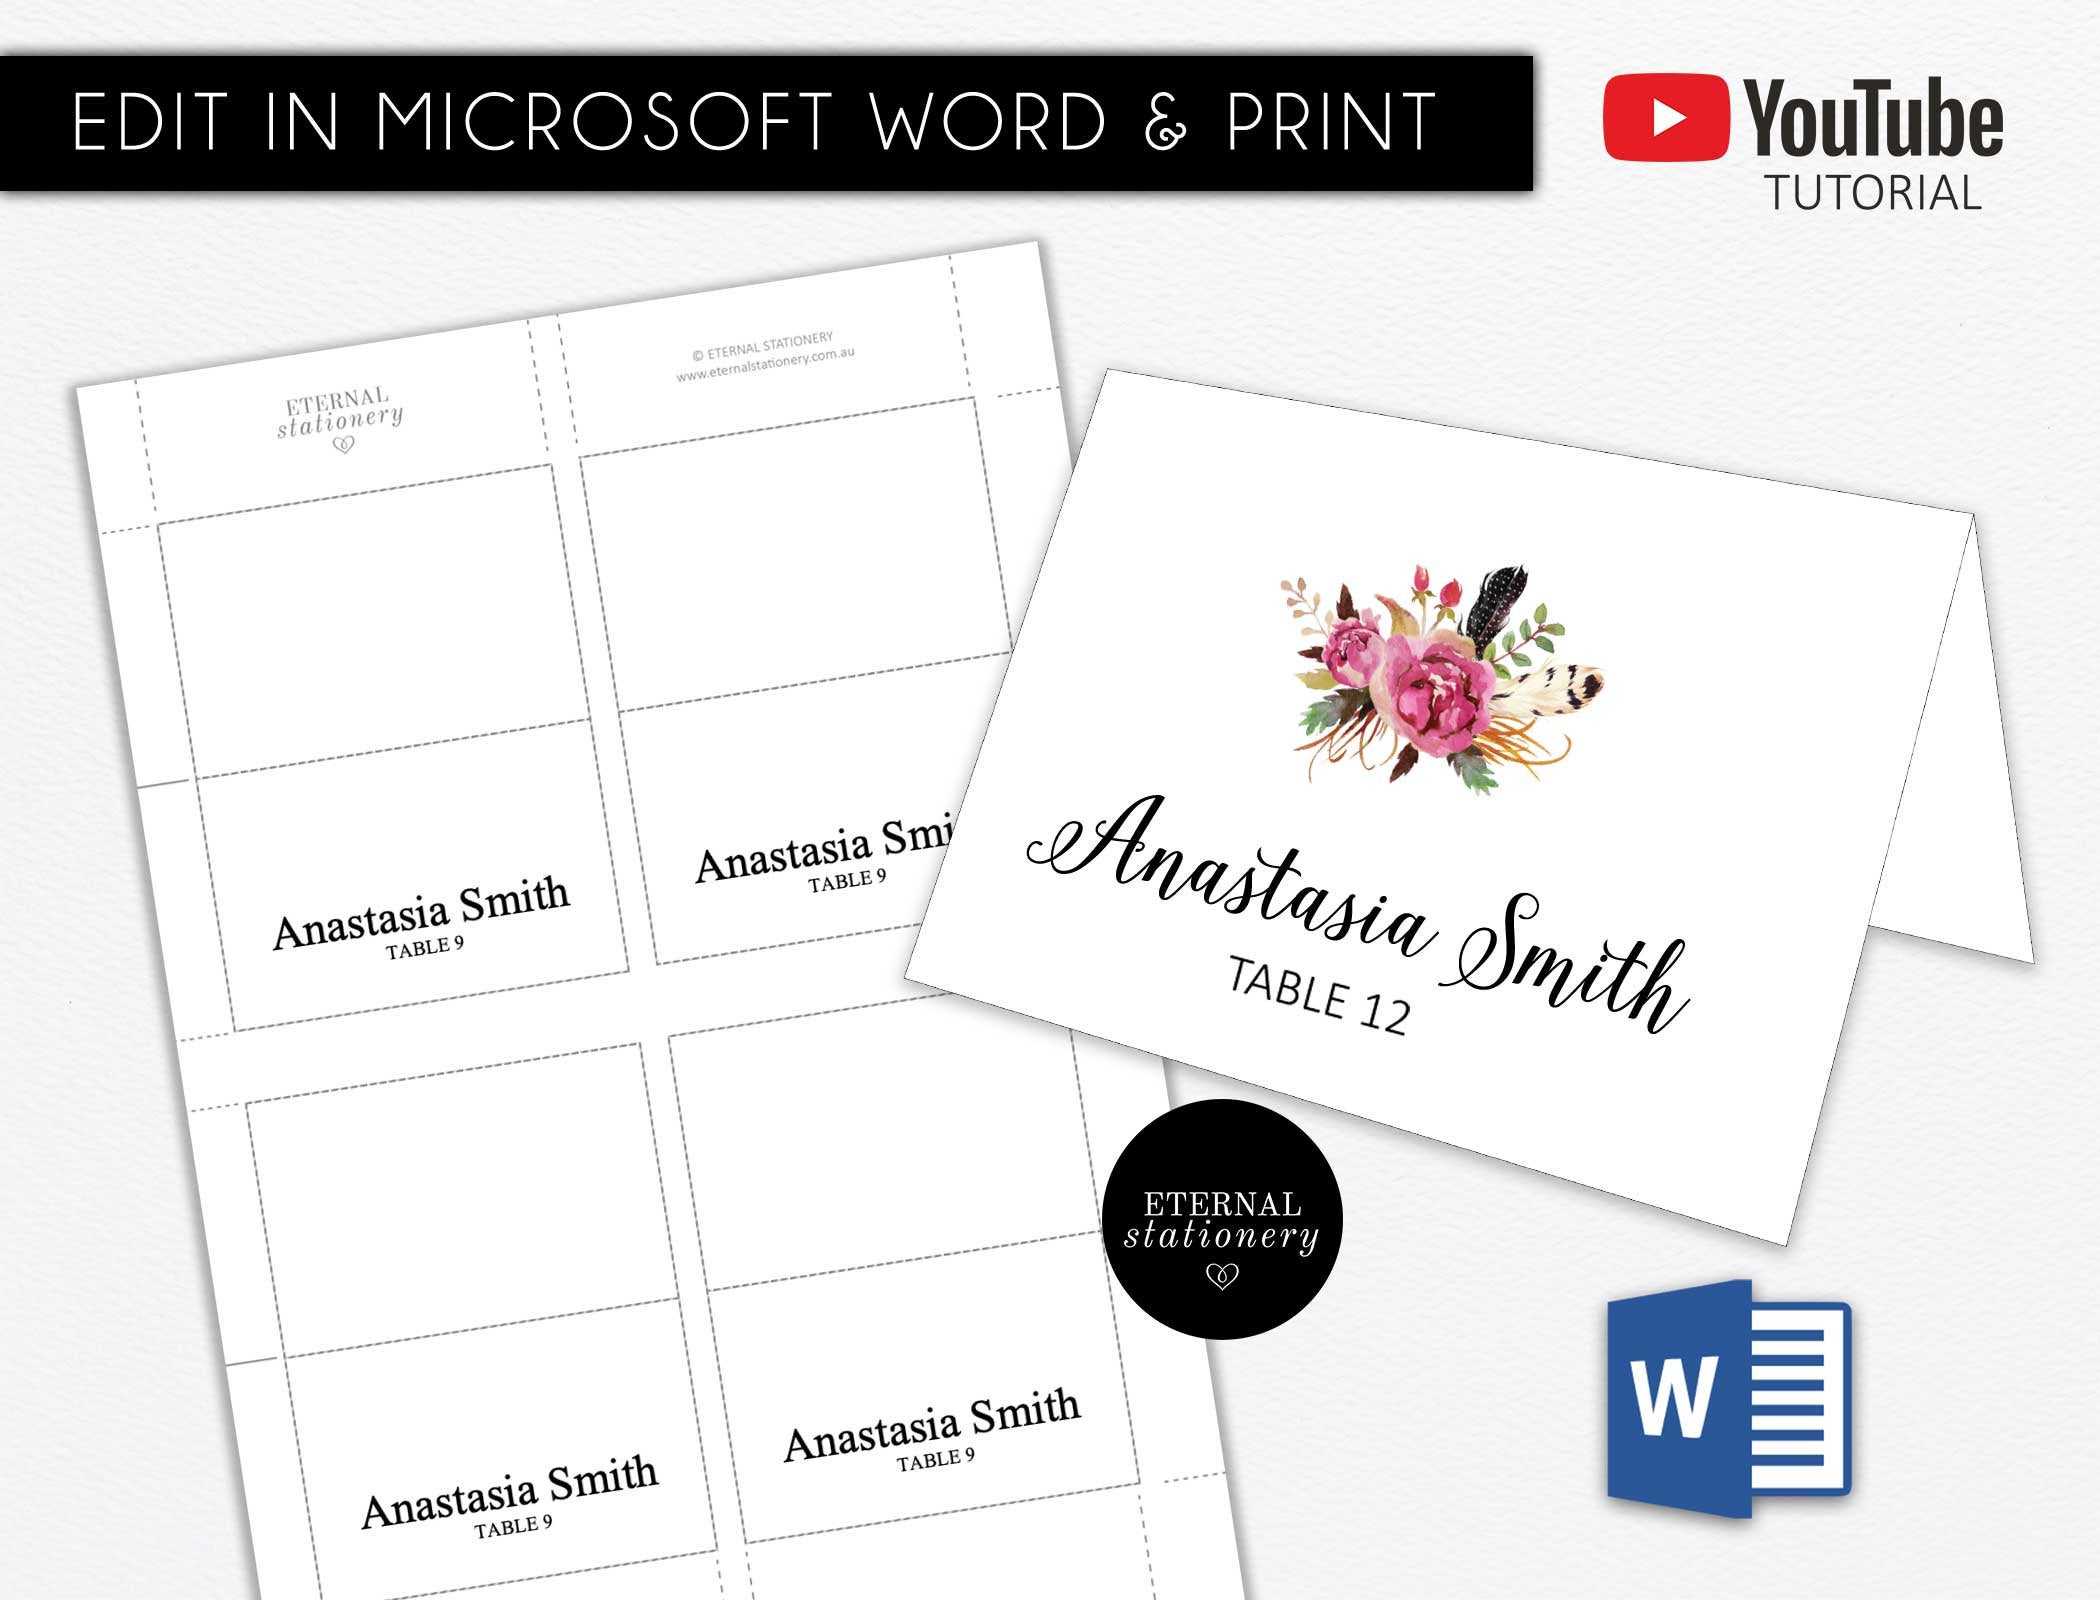 Diy Editable Microsoft Word Place Card Template, Wedding Place Card, Tent  Card, Engagement, Corporate Place Card, Escort Card, Pc 01 In Microsoft Word Place Card Template